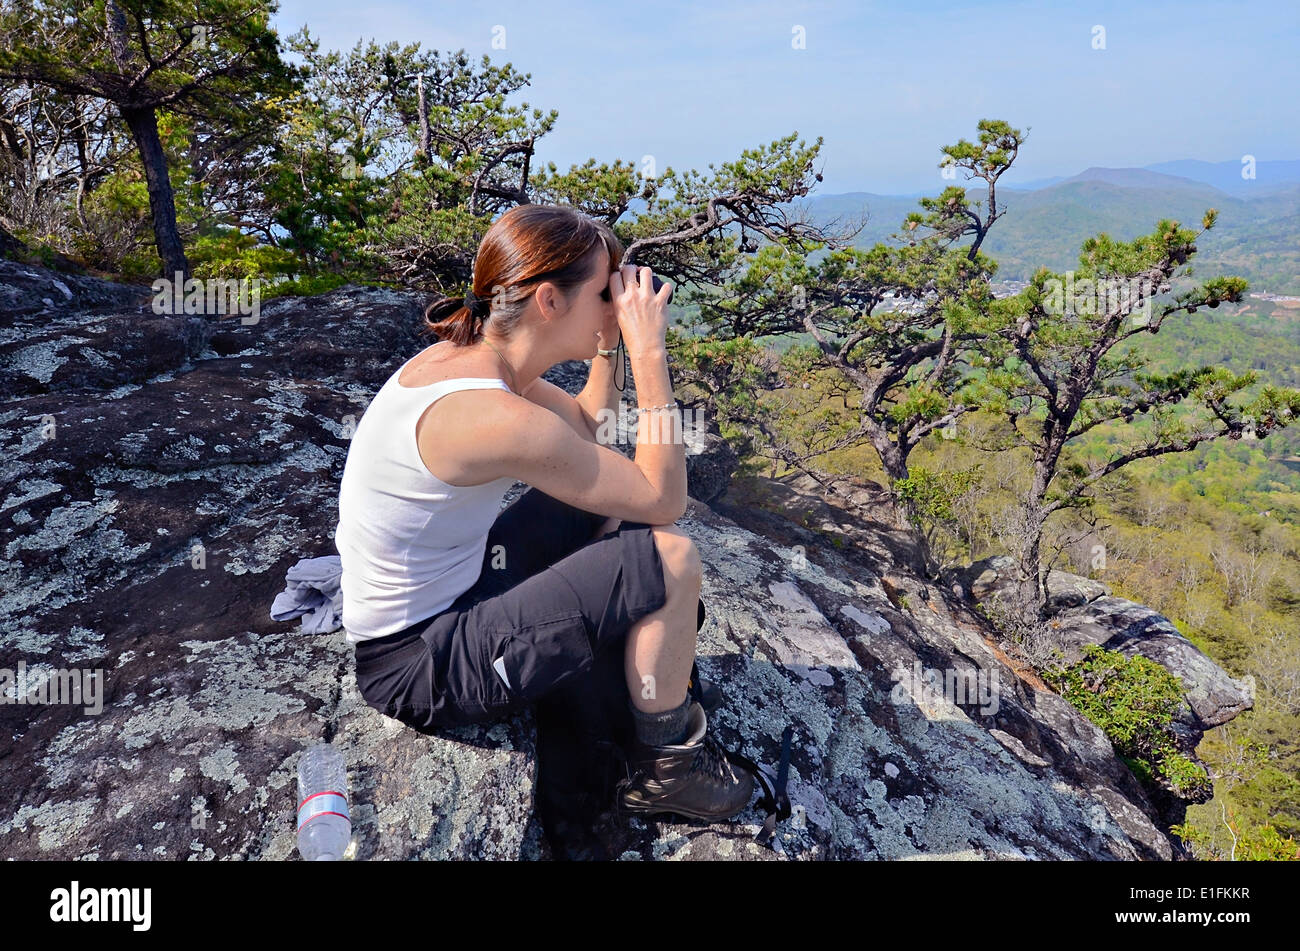 A woman hiker on a rock overlook using her binoculars. Cell phone on her pocket. Stock Photo